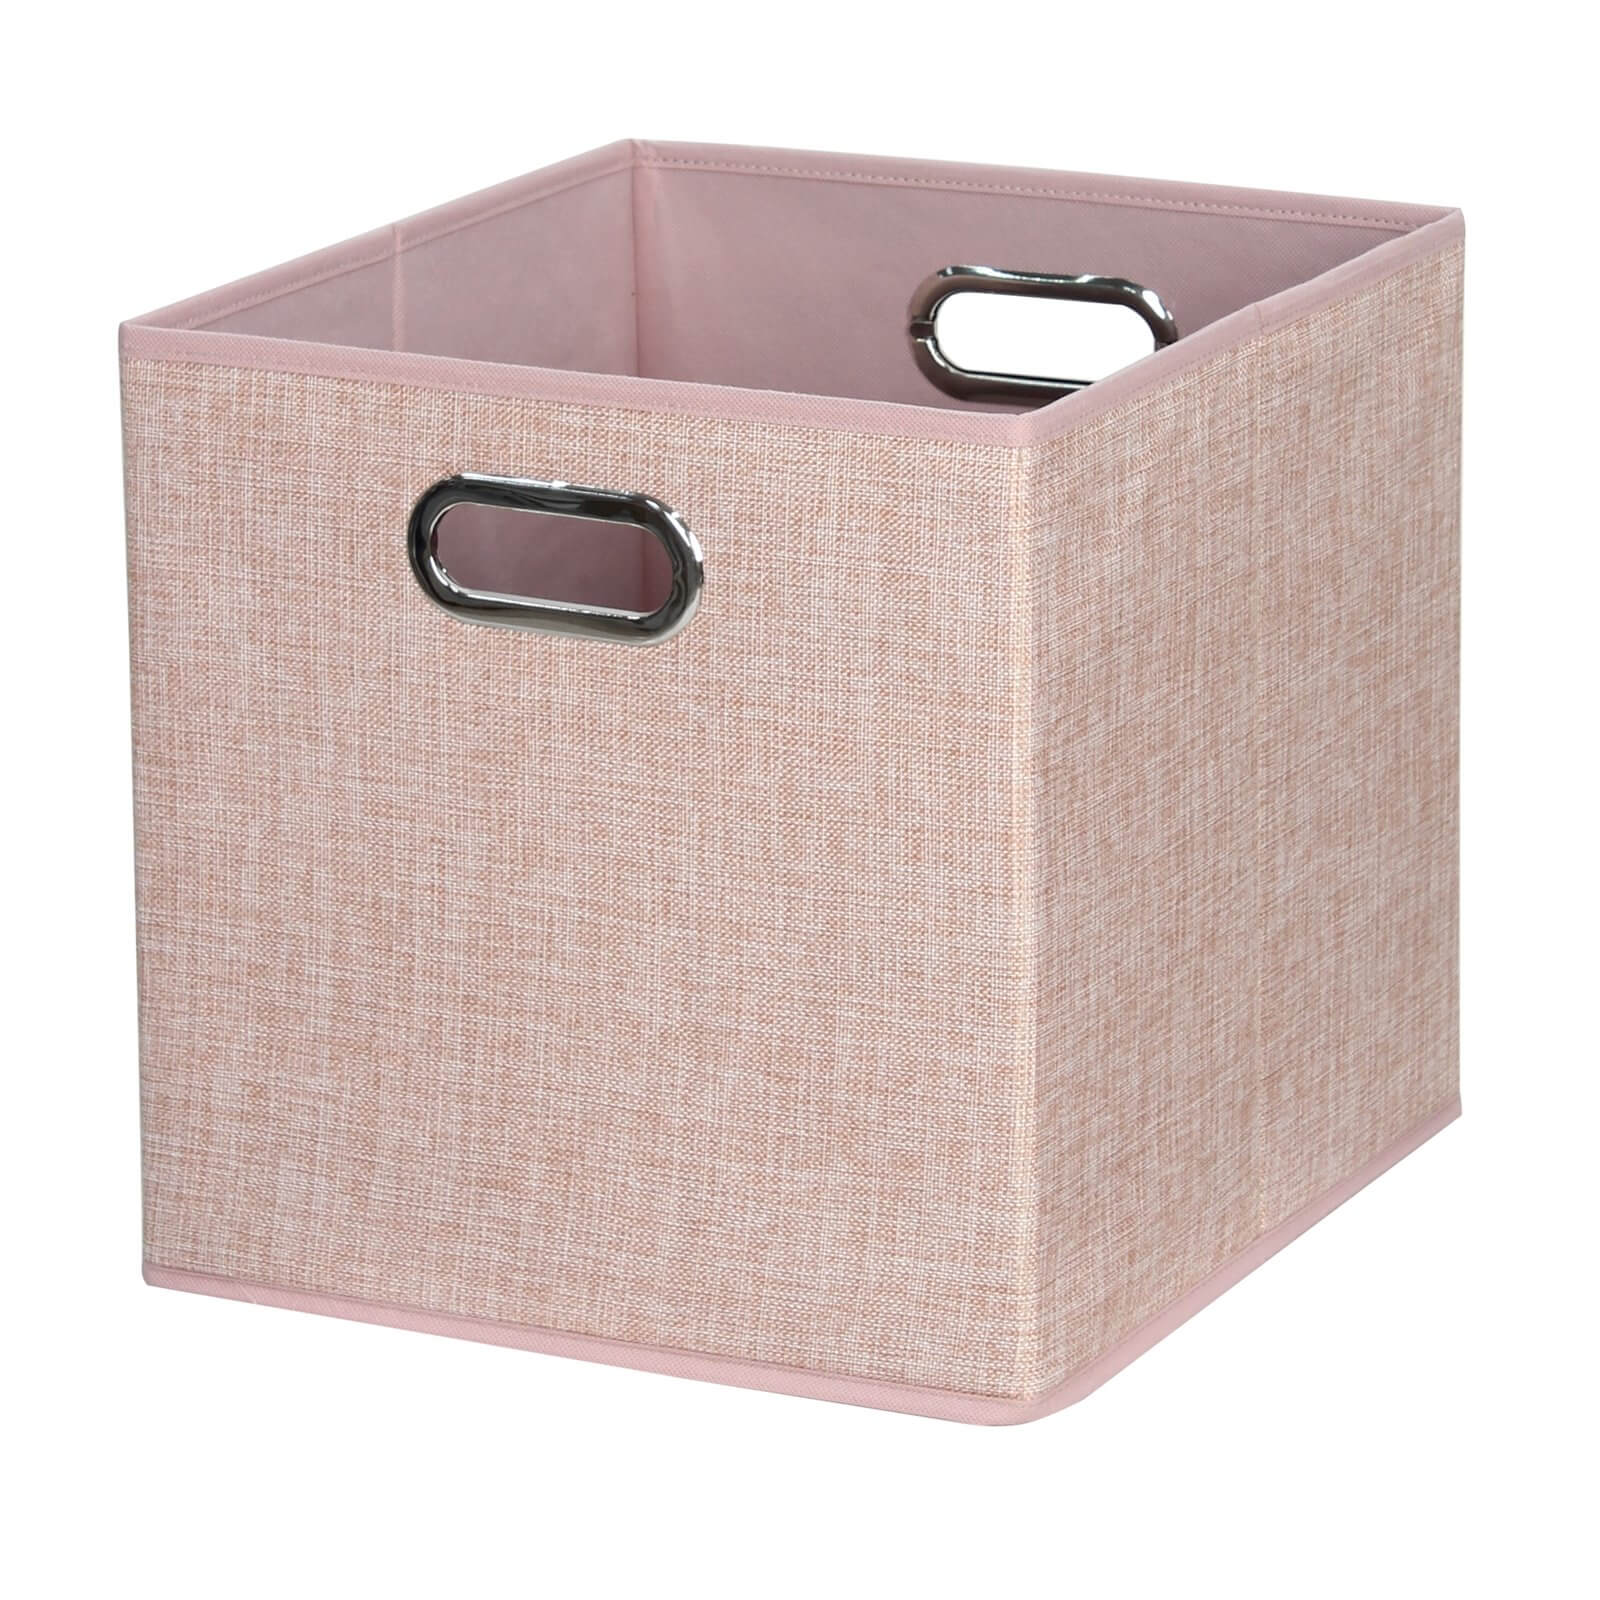 Clever Cube Fabric Insert - Blush Pink